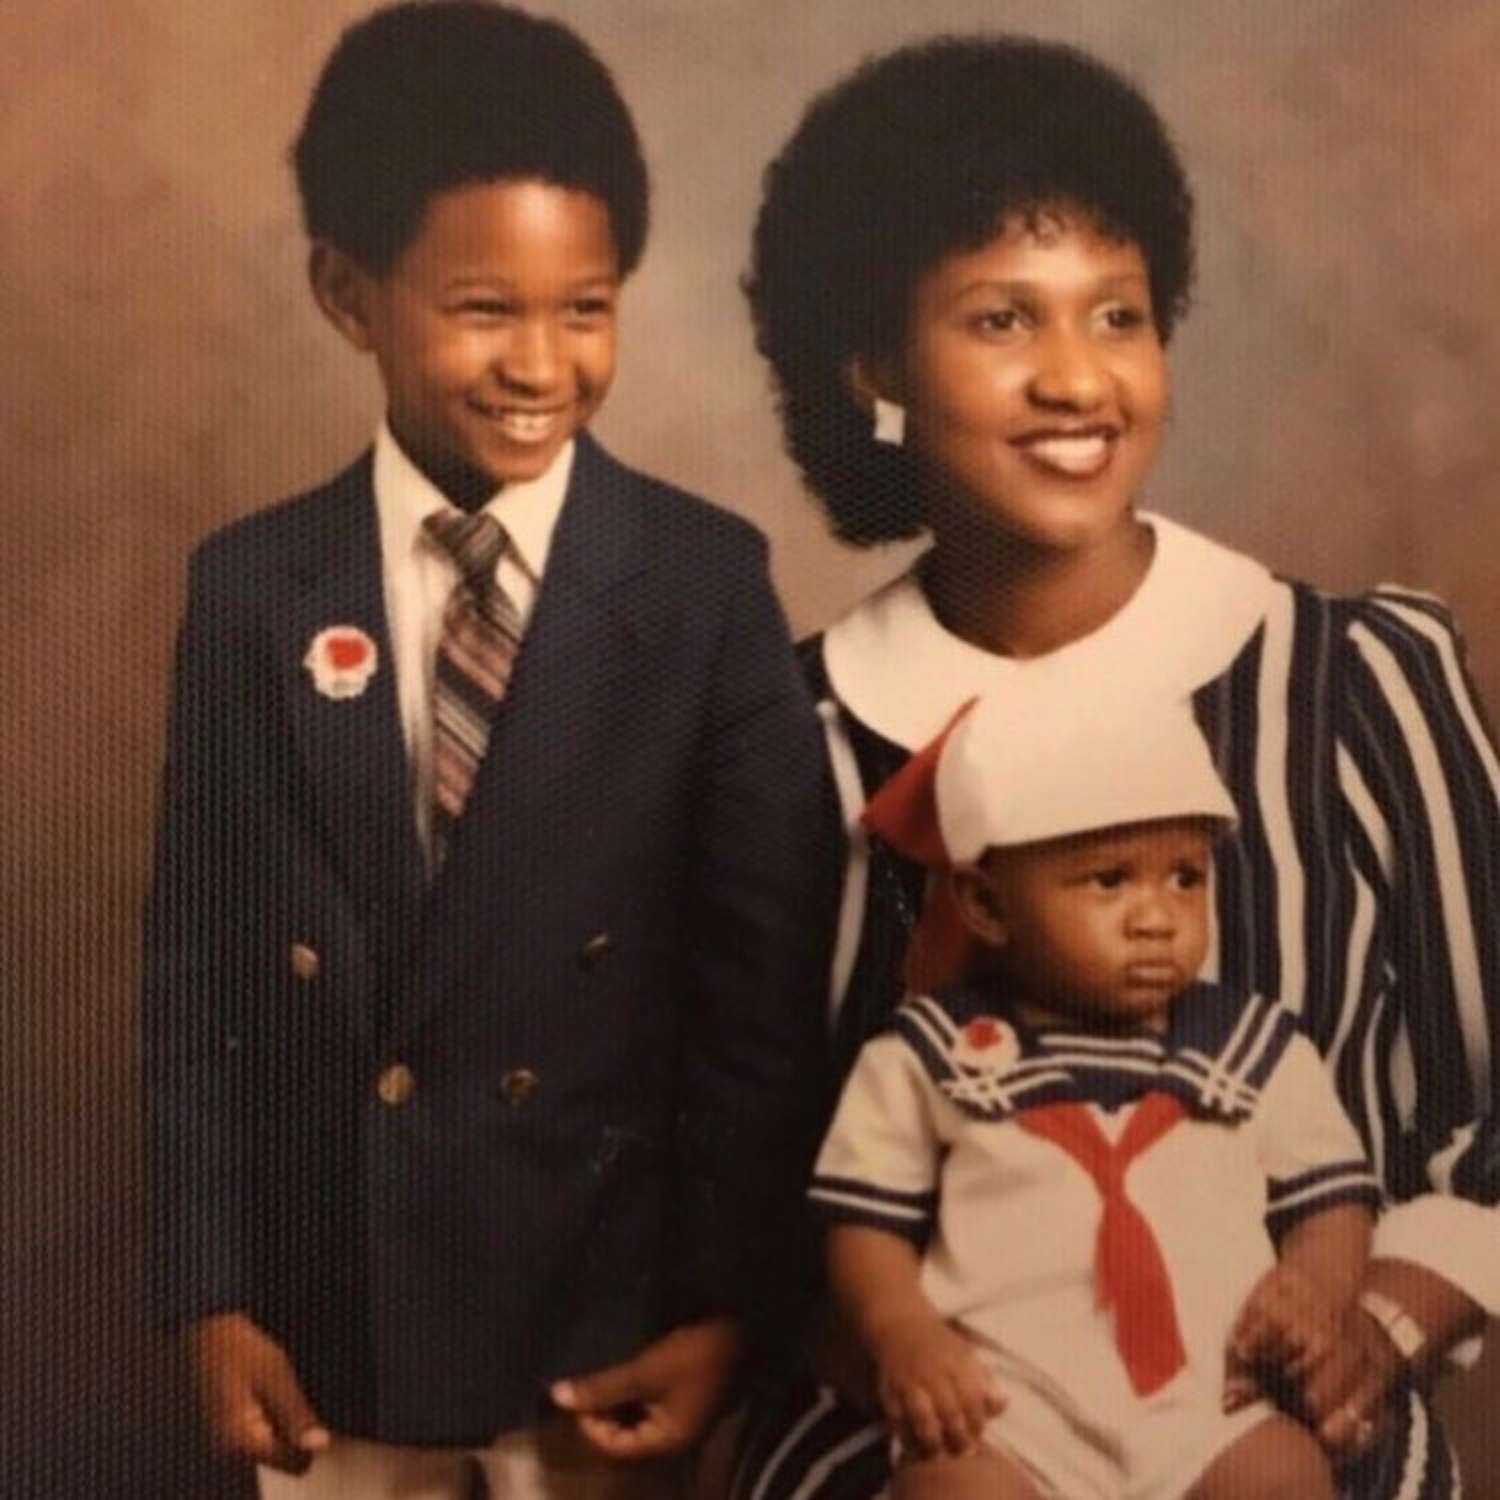 usher and his brother when they were young 1